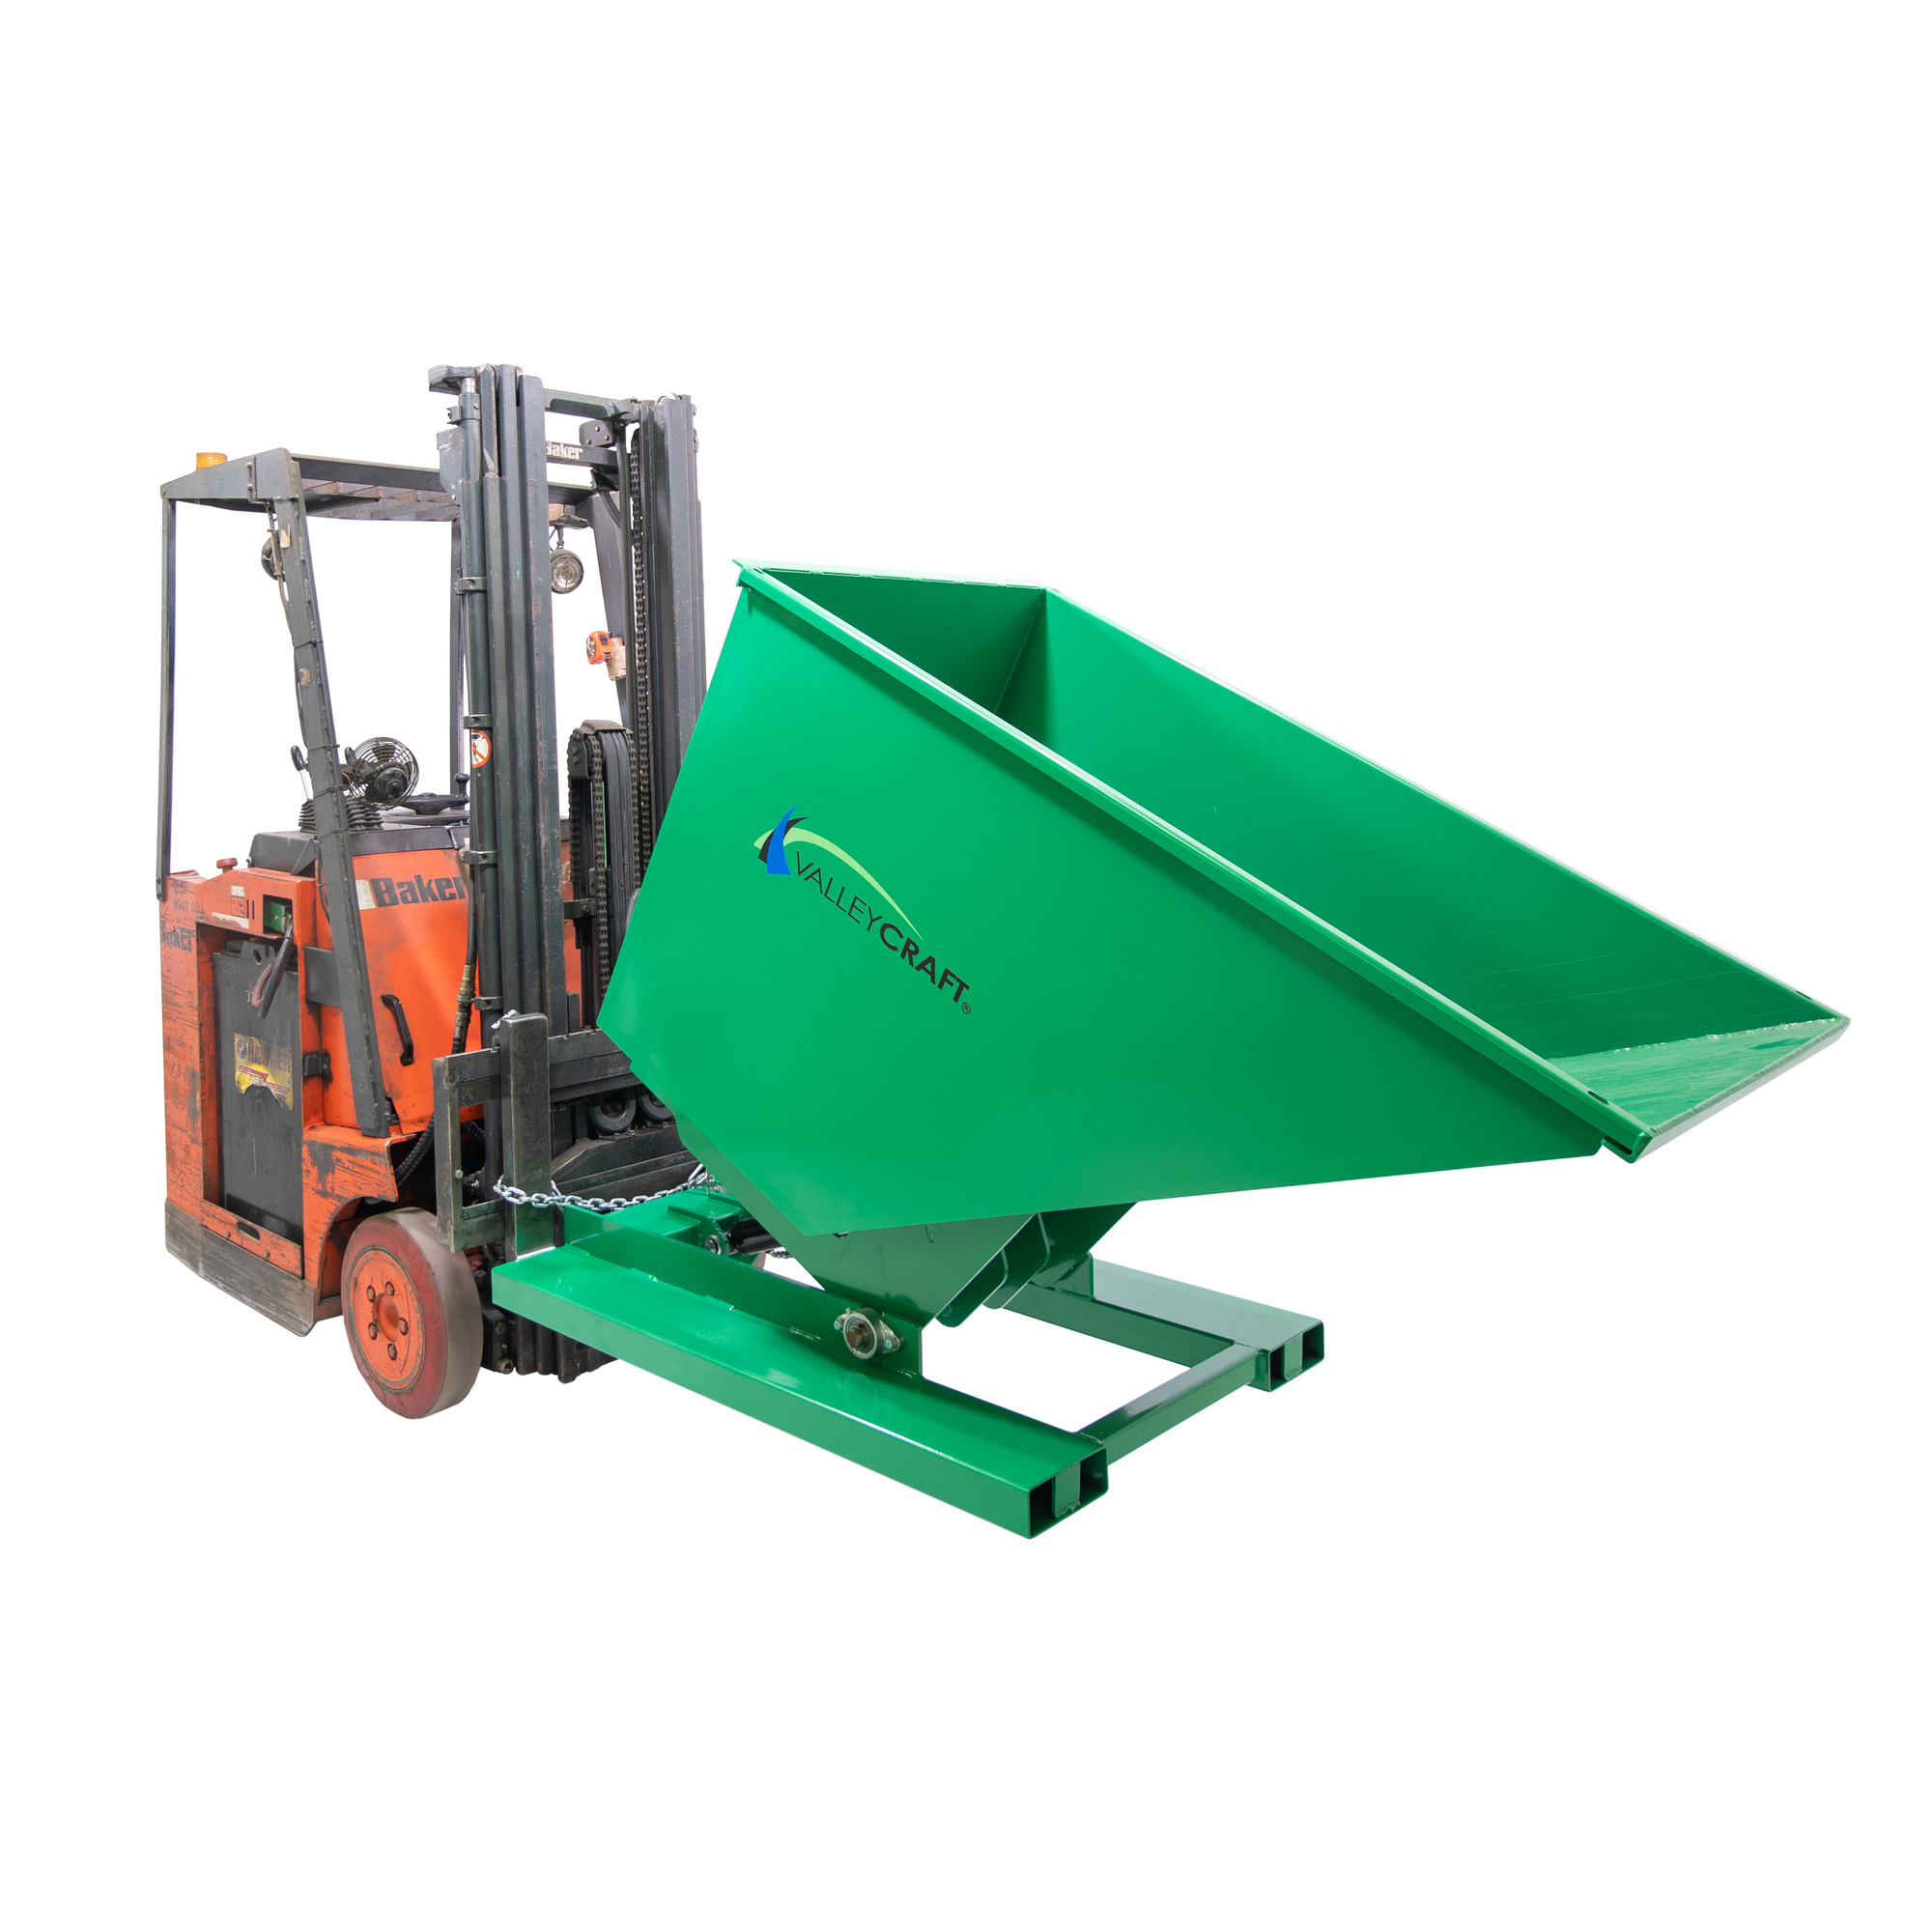 Valley Craft, Powered Self-Dumping Hopper Forklift Attachment, Capacity 6000 lb, Volume 1 ydÂ³, Color Green, Model F89142